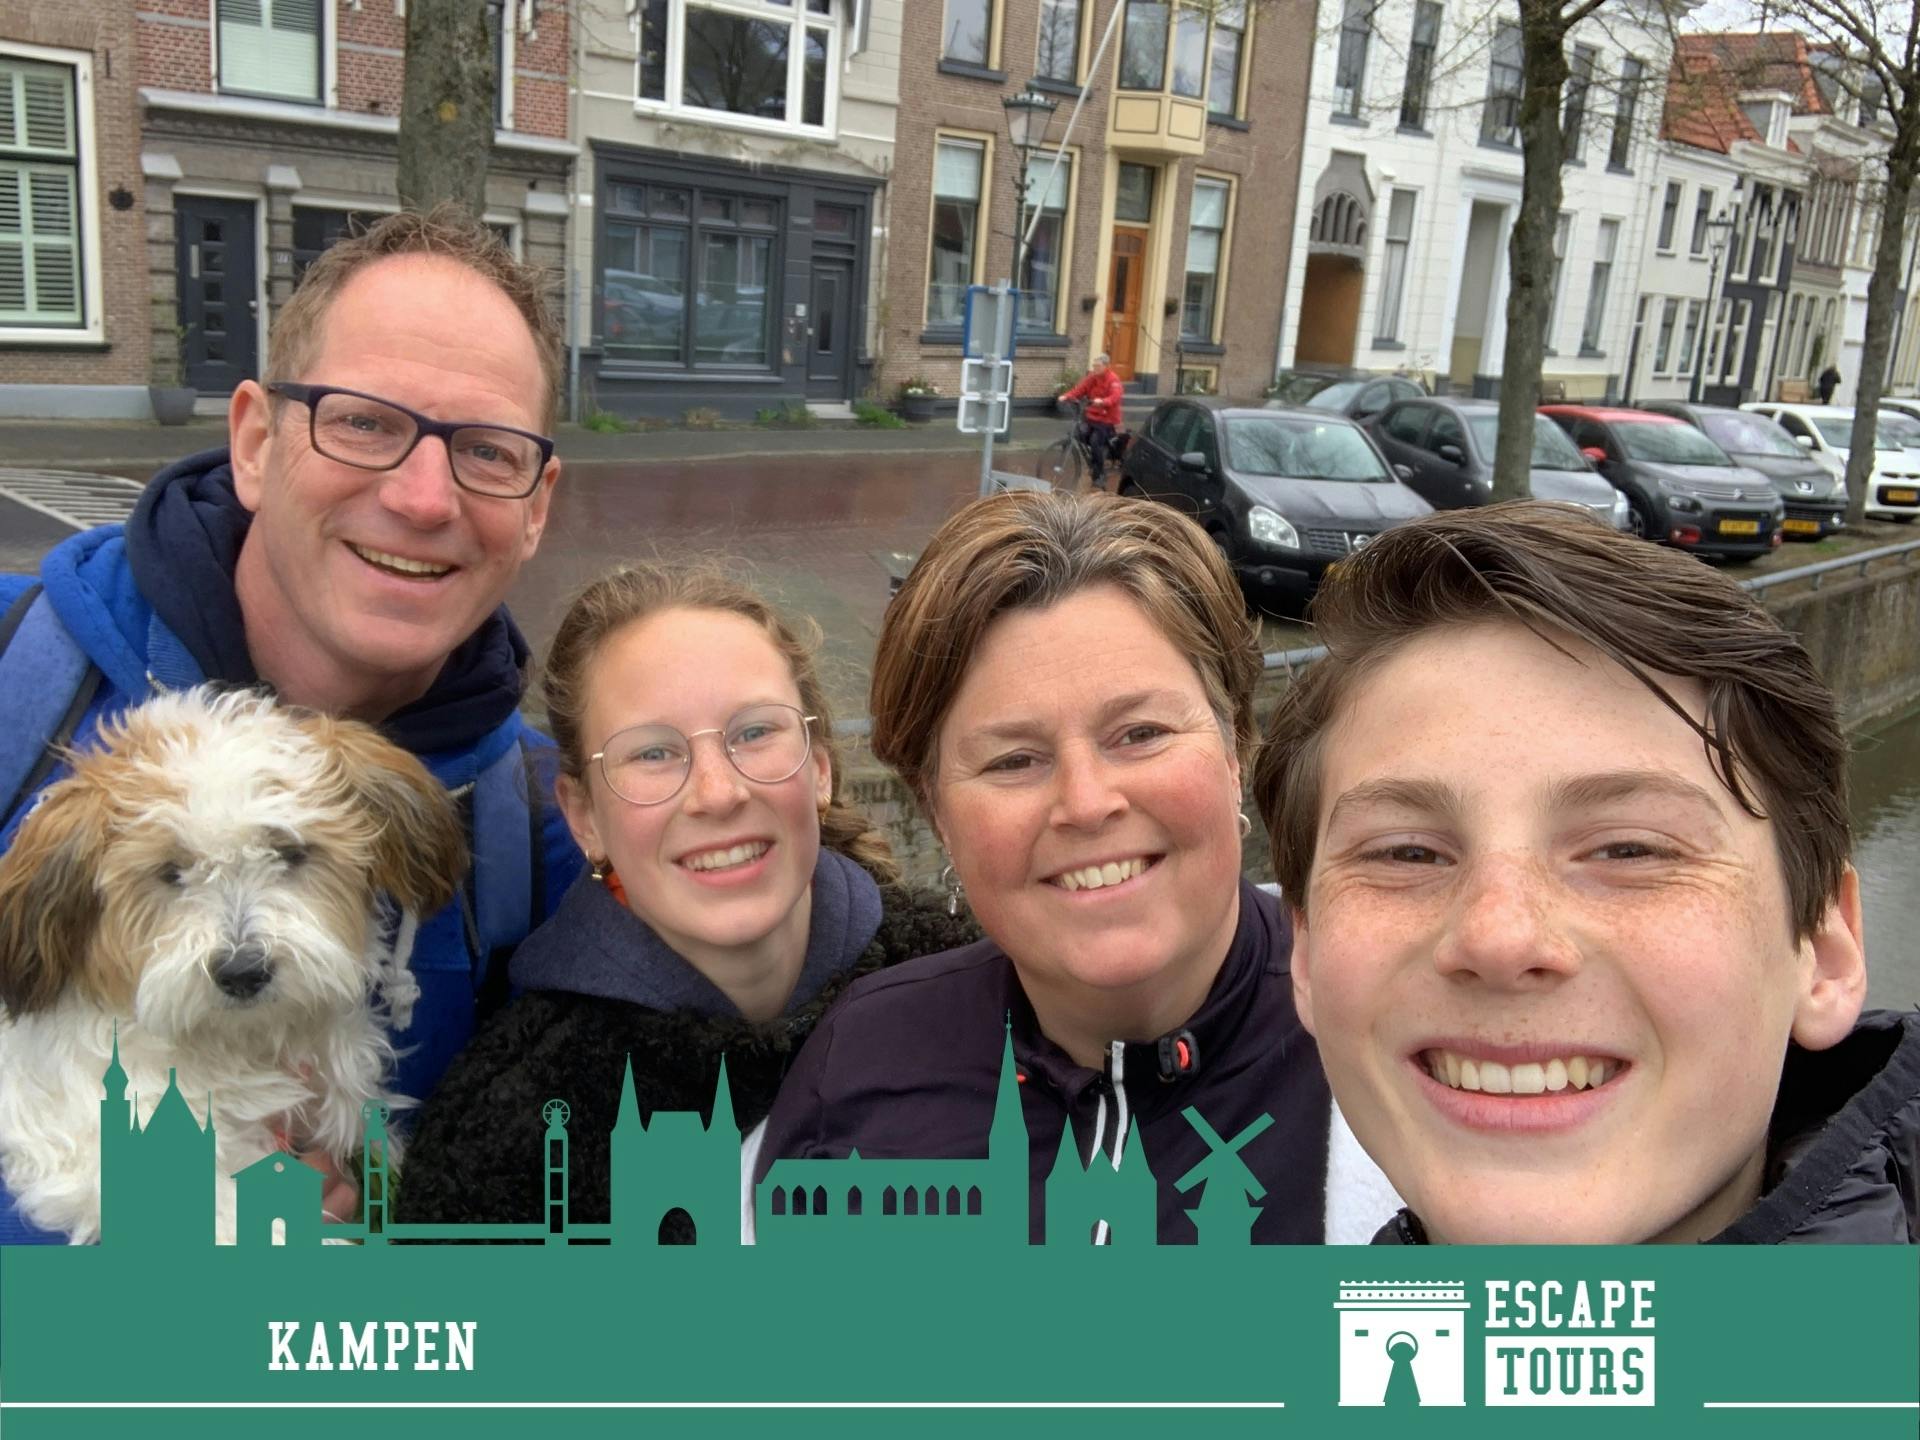 Escape Tour self guided interactive city challenge in Kampen Musement